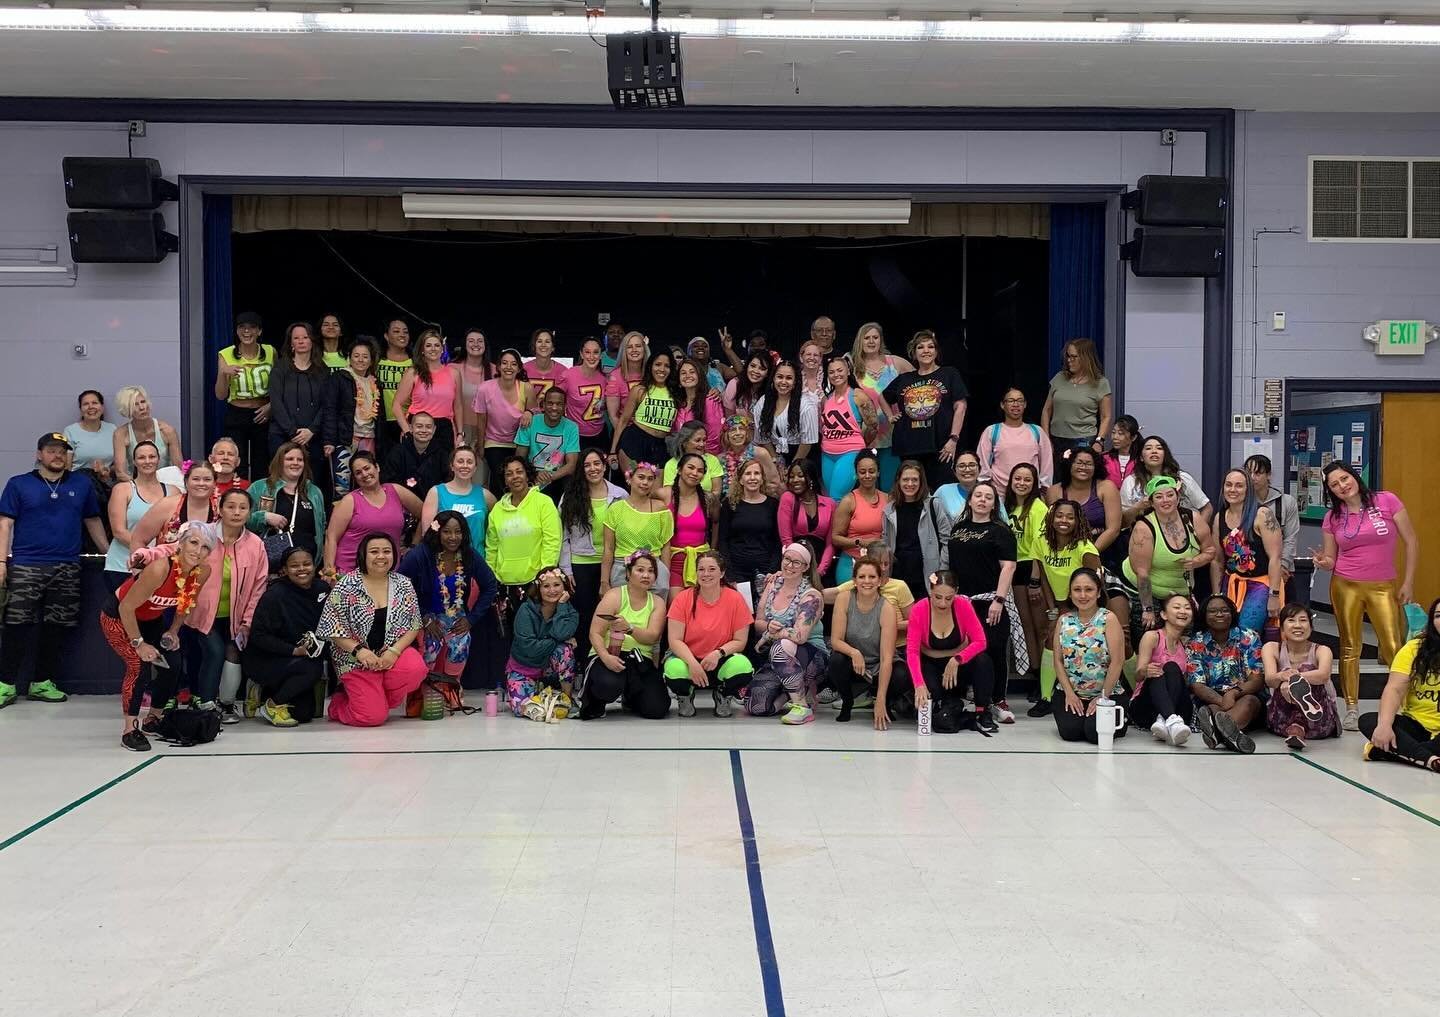 ❌❌ MIXXEDFIT FAM ❌❌

We wanna send a huge congratulations to our sisters from Colorado&hellip; NT Cheryl Lynn Pan Sroufe &amp; all the MF instructors &amp; dance fitness enthusiasts for having such an amazing event this past weekend!!! Proceeds colle